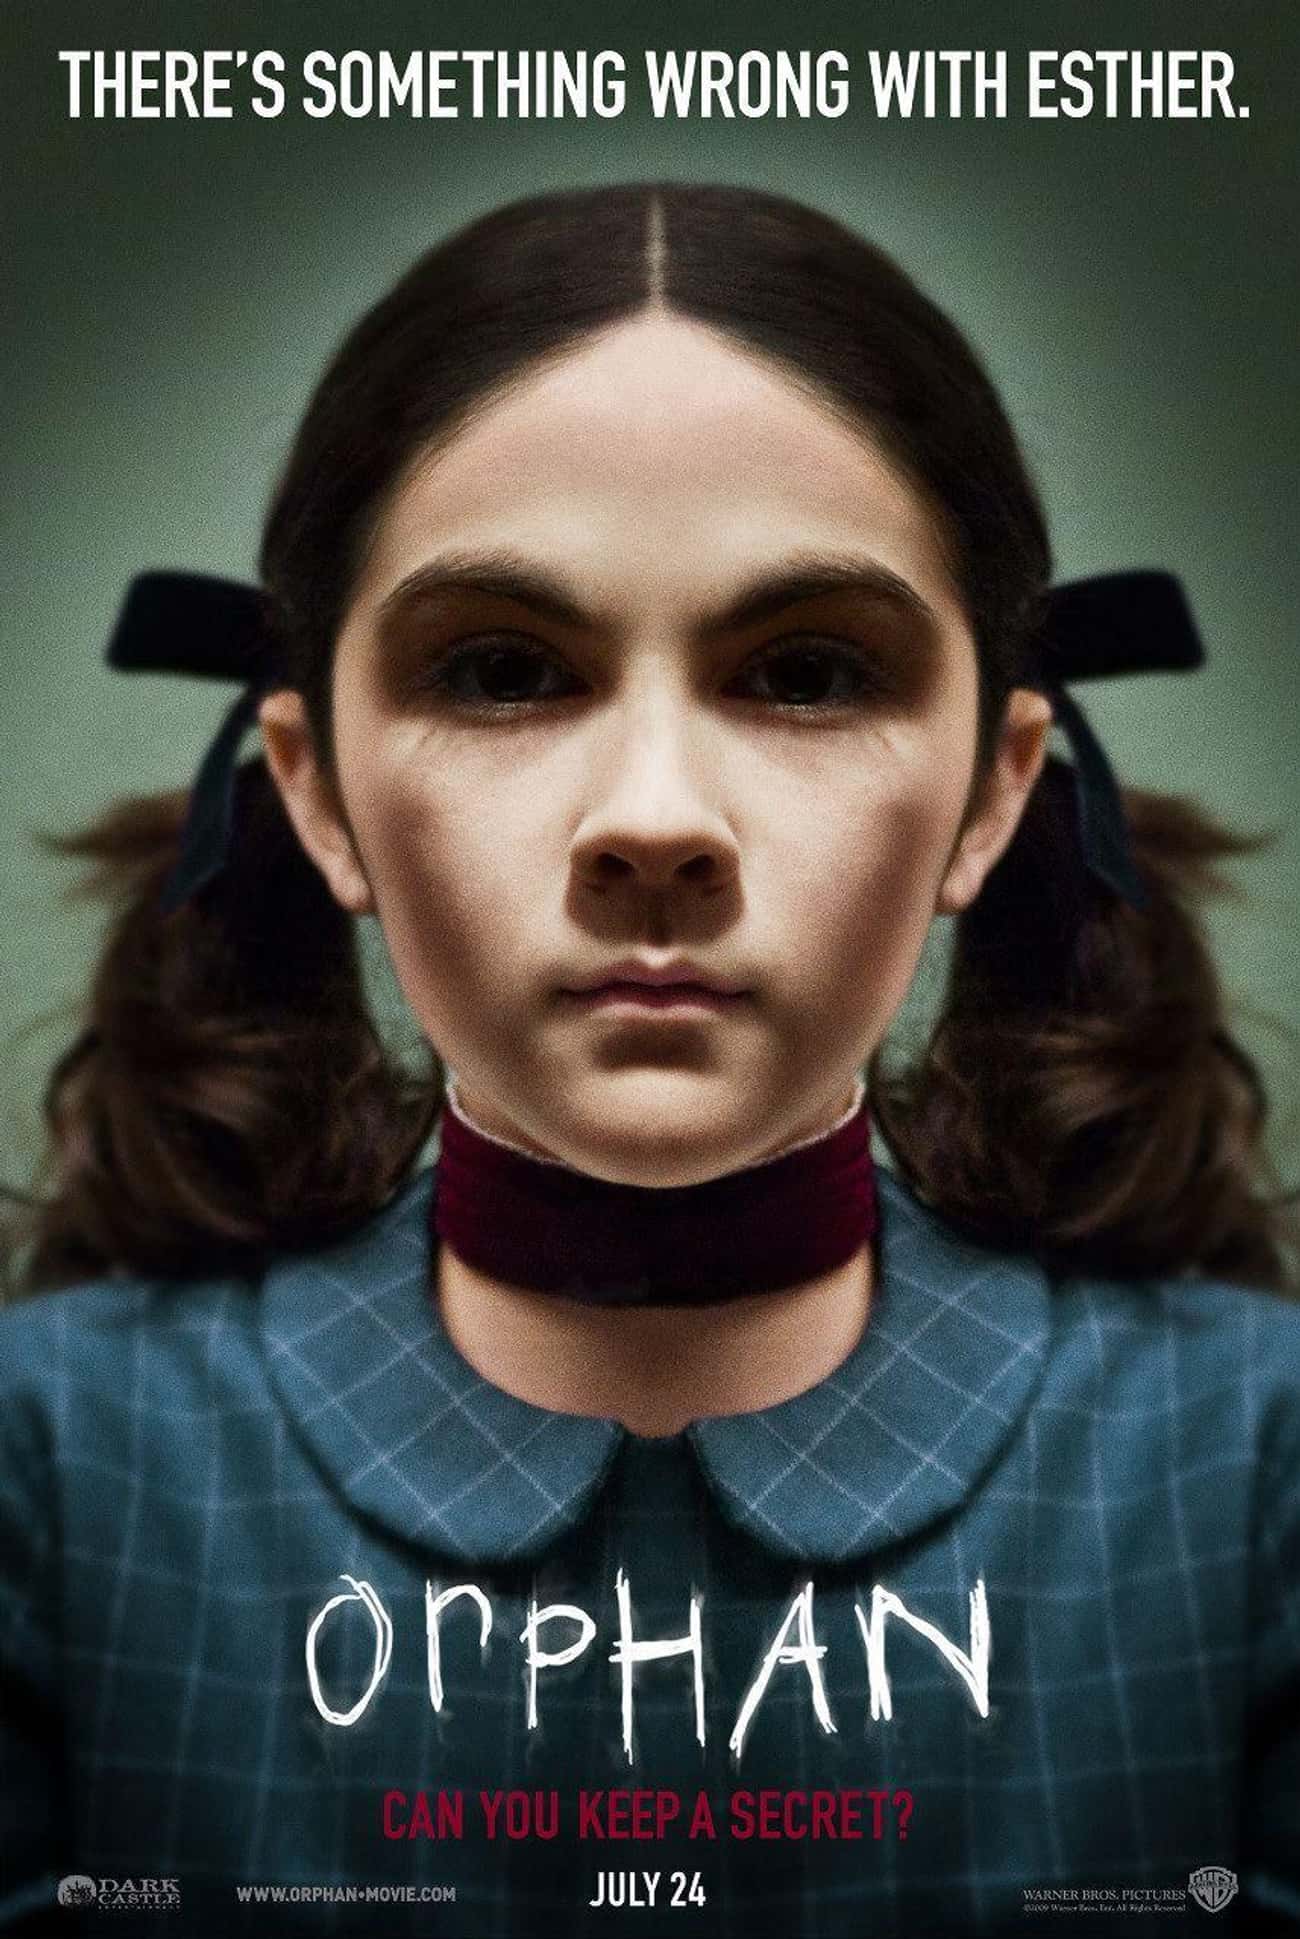 There's A Reason The Image Of The 'Orphan' Is Unsettling